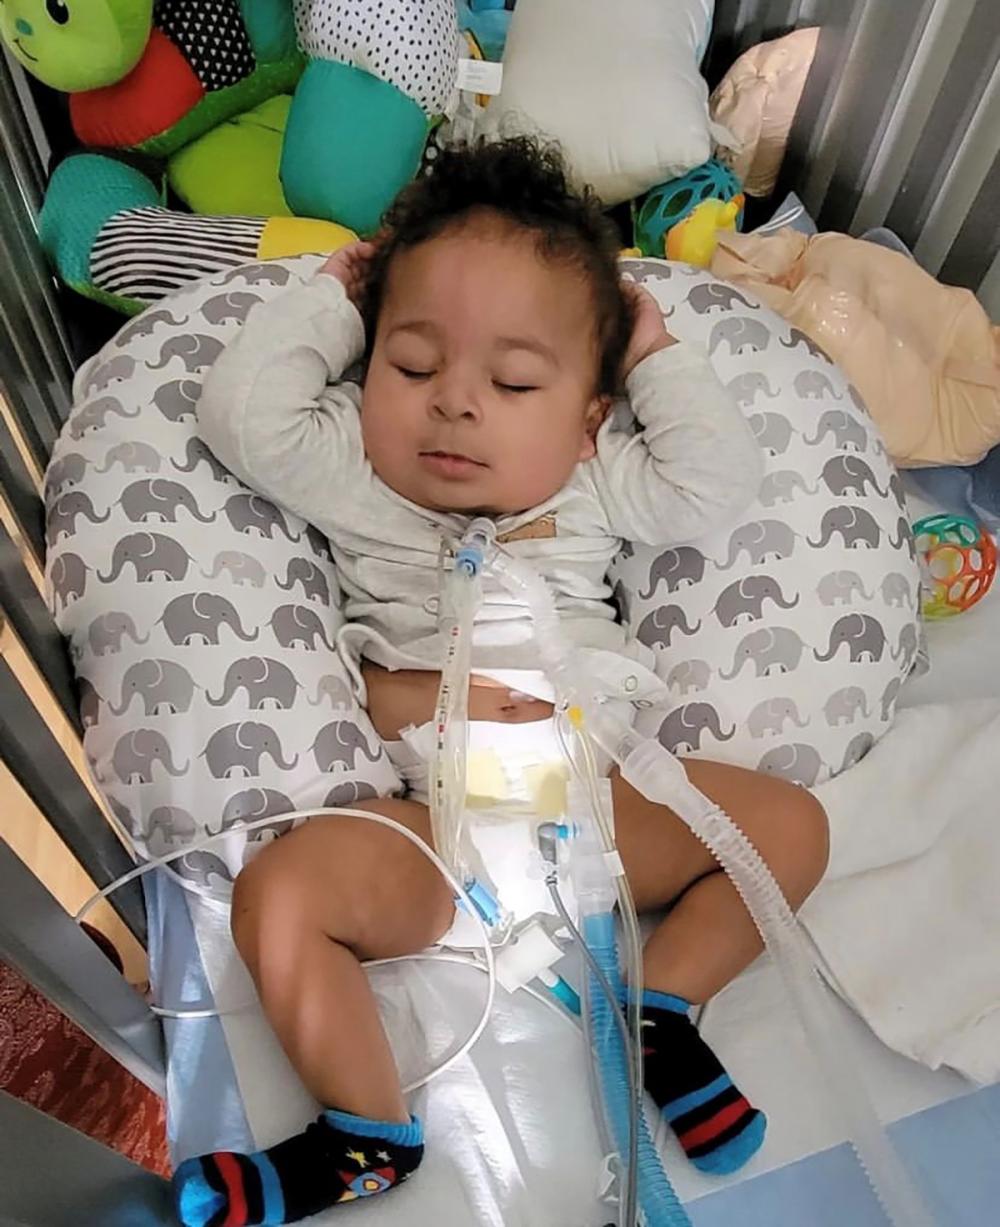 Aydin Martin, 11 Months Old, Sleeps with His Arms Clasped Behind His Head and Tracheal Tube Extending from His Throat